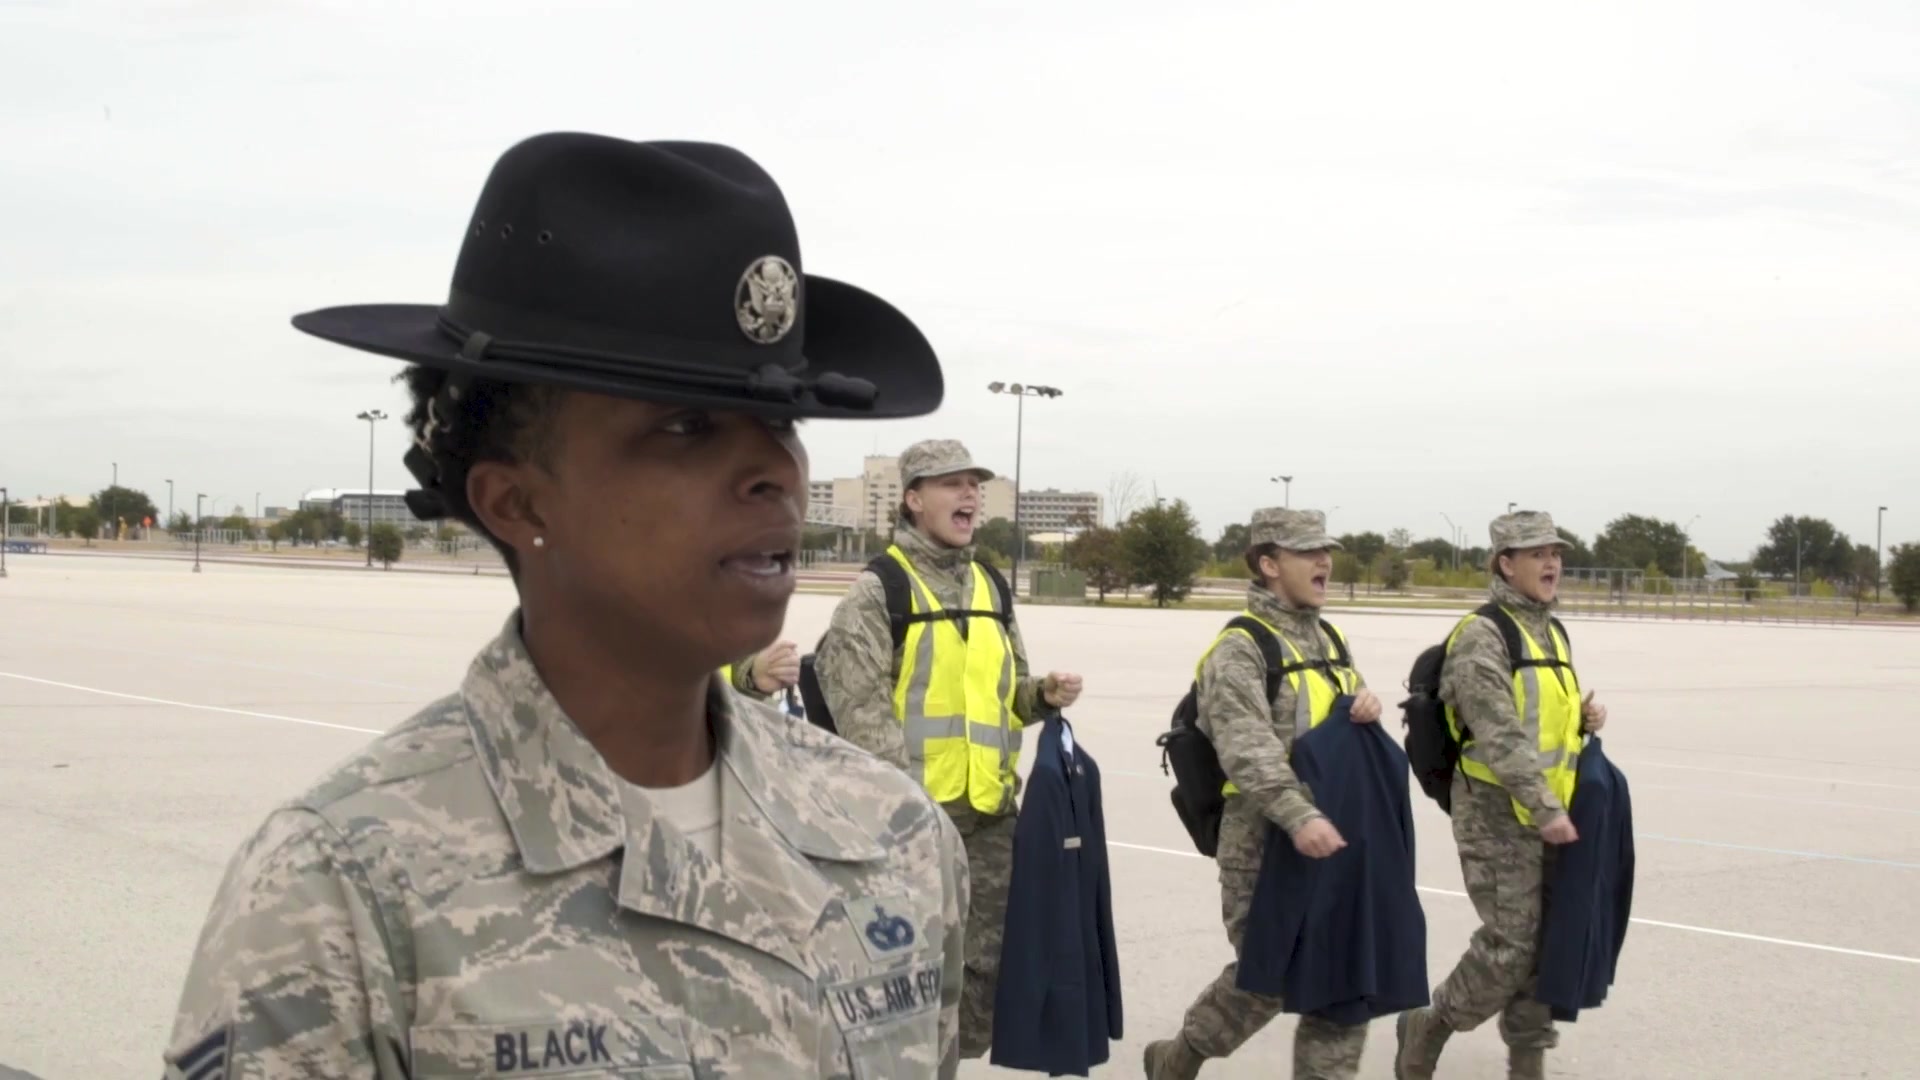 TSgt Sylvia Black Feature (with graphics)